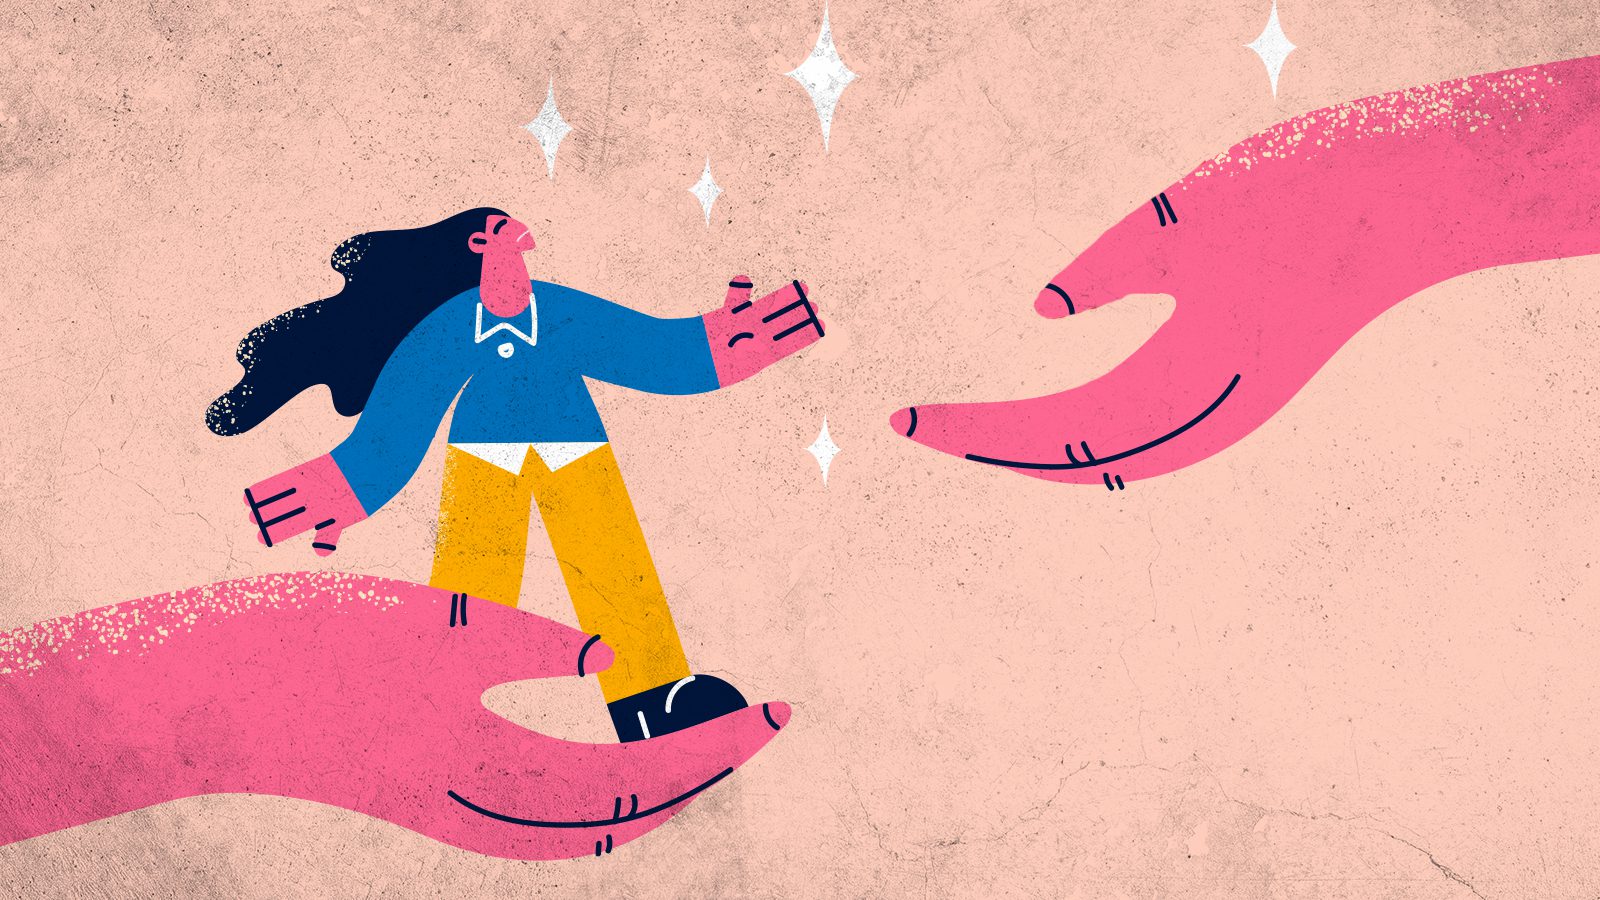 5 Steps to Increase Empathy, According to Psychology